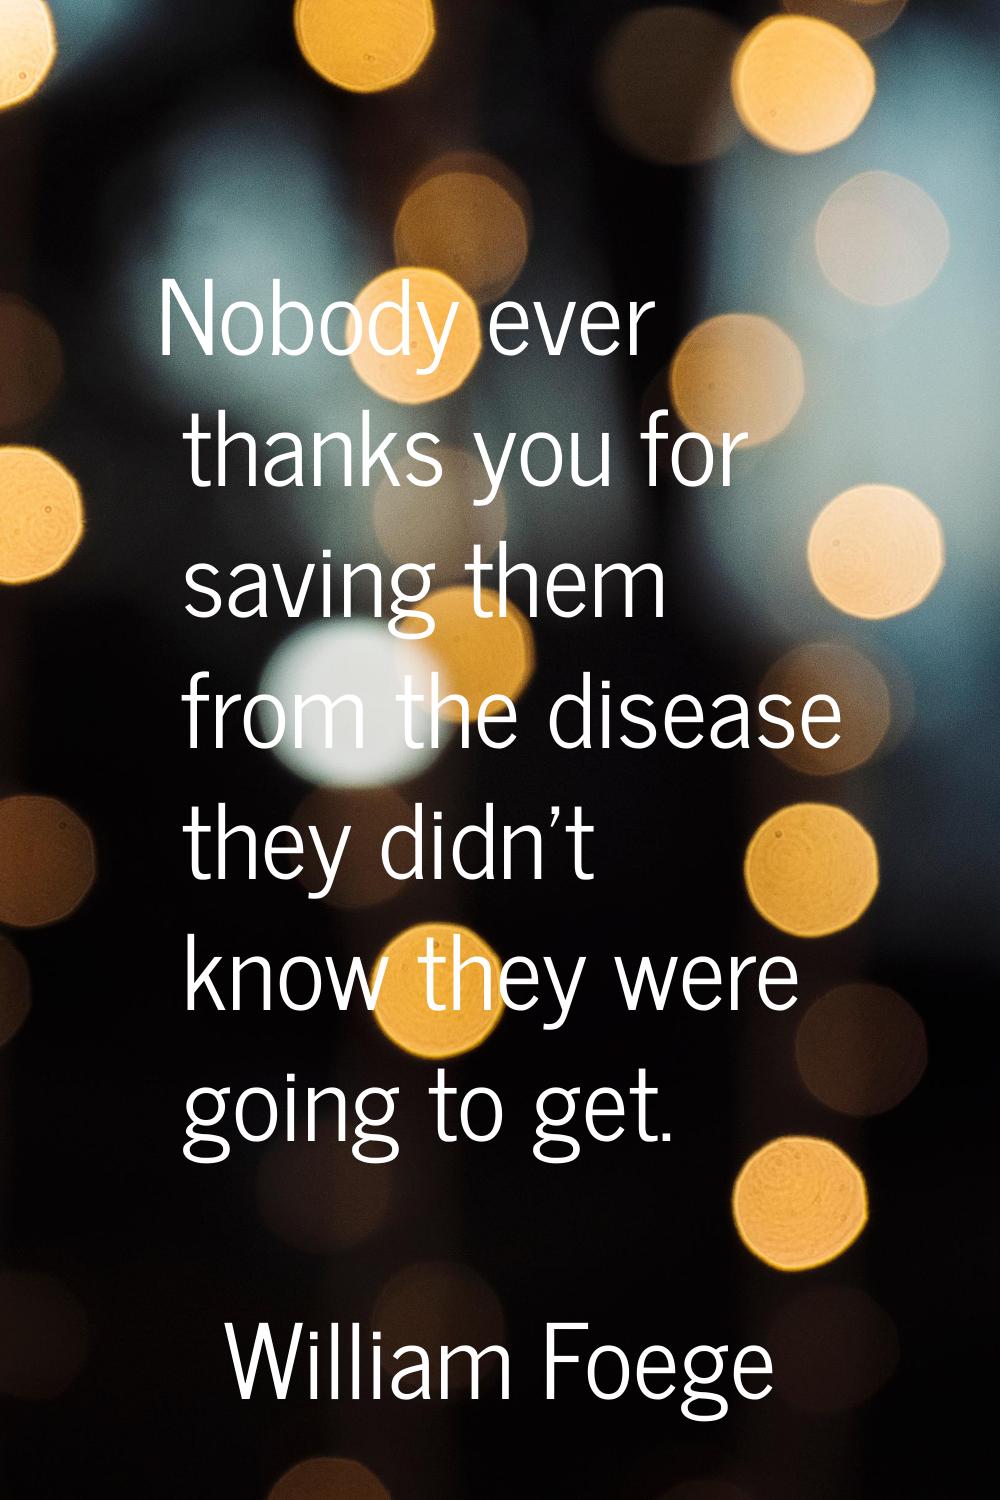 Nobody ever thanks you for saving them from the disease they didn't know they were going to get.